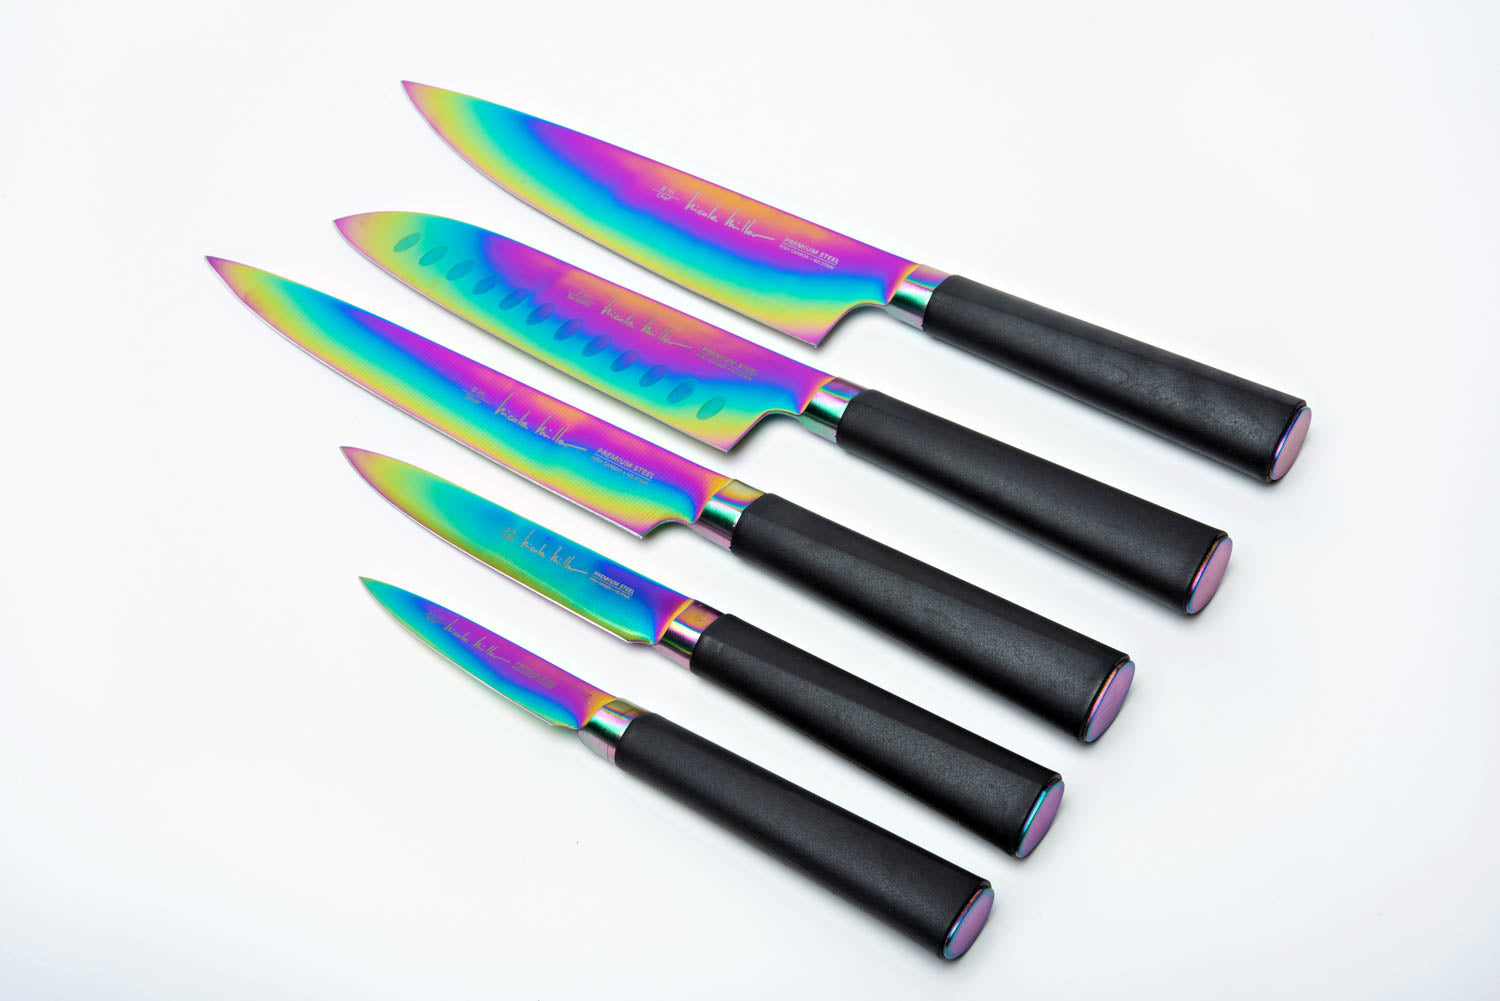 Cook N Home 9-Piece Ceramic Knife Set with Sheaths, Multicolor